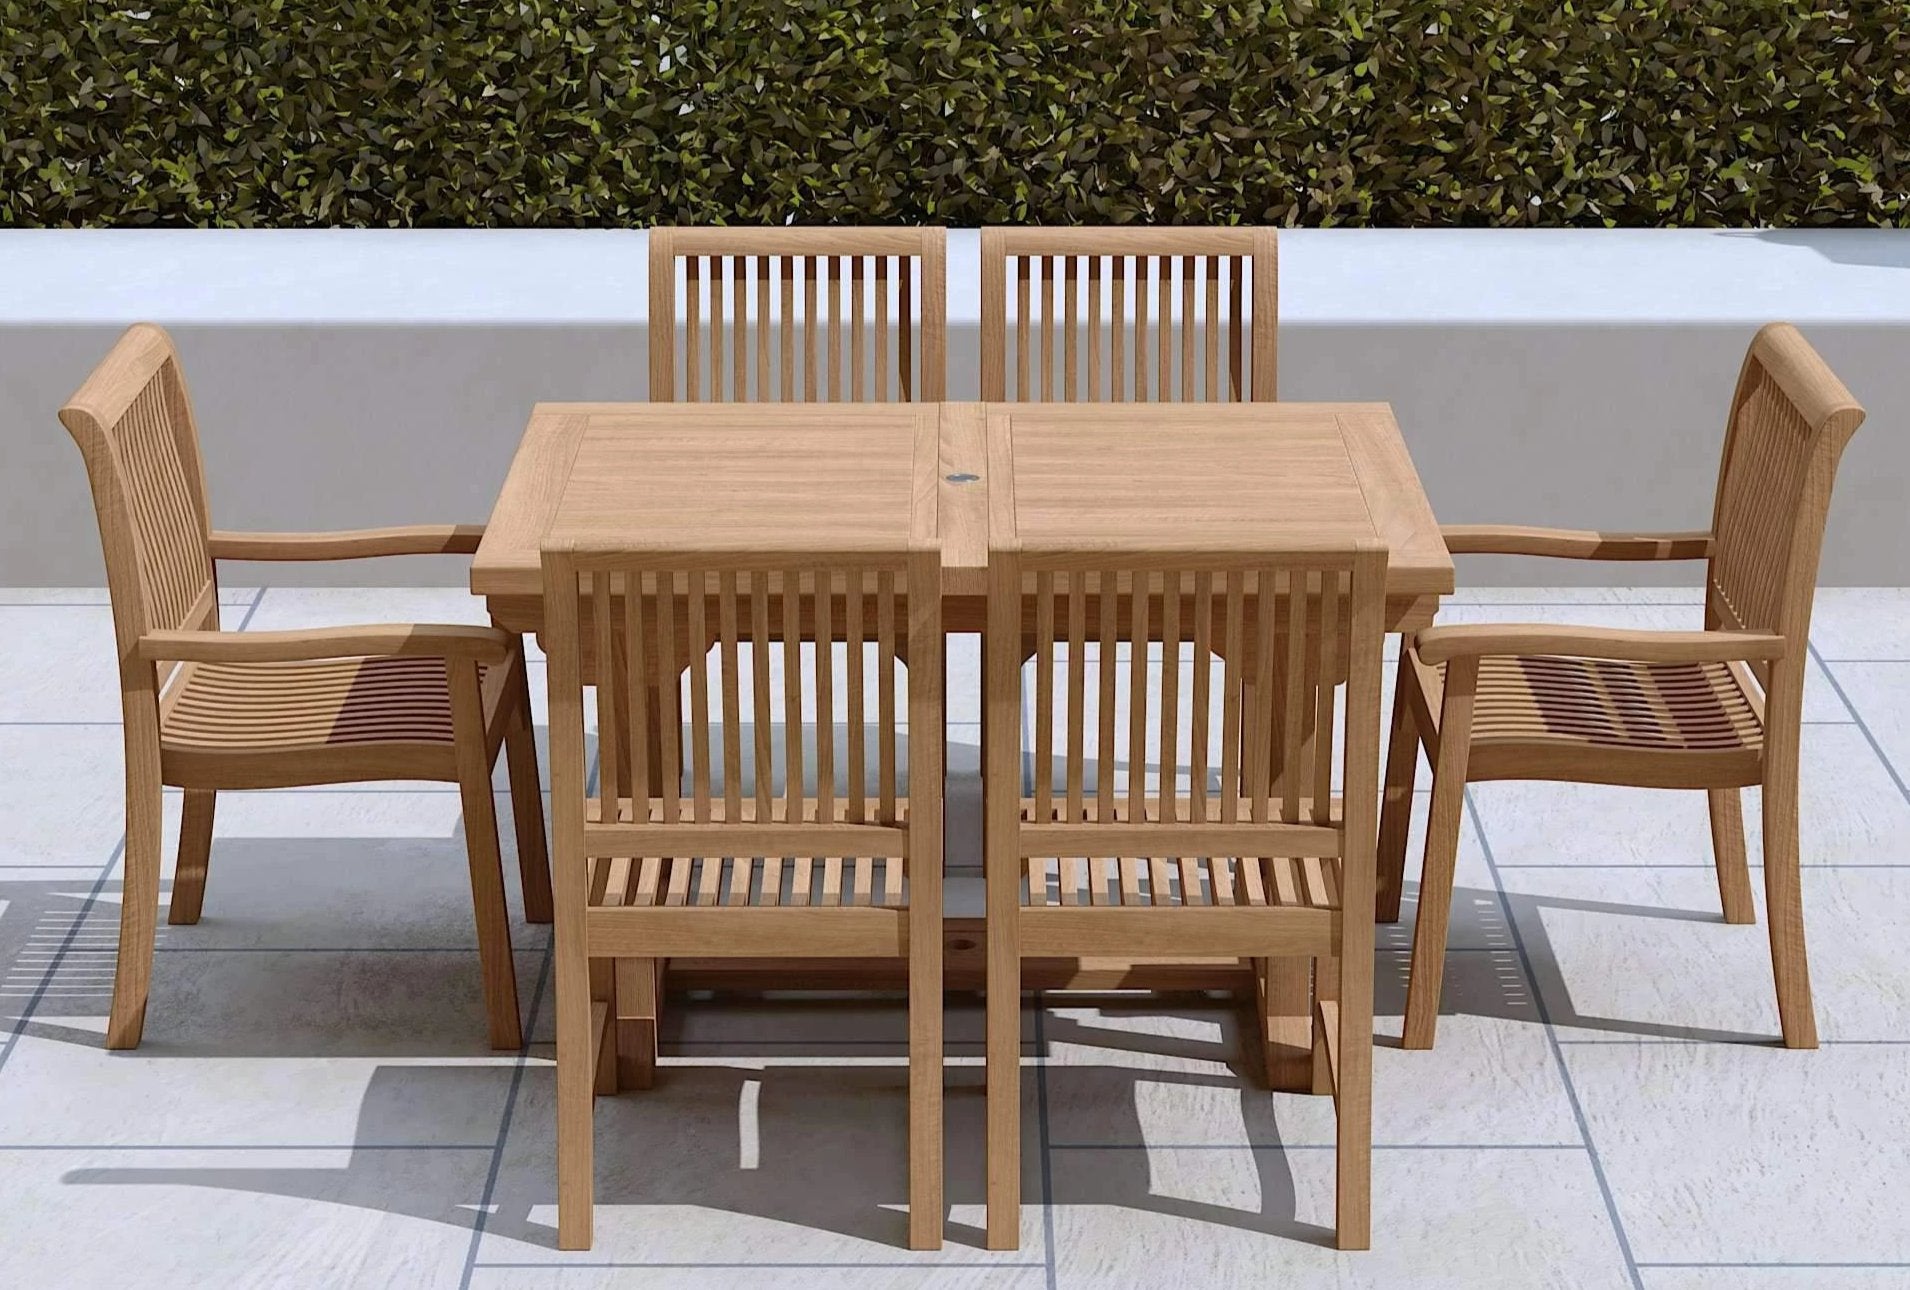 Garden Extending Dining Table & 6 Chairs